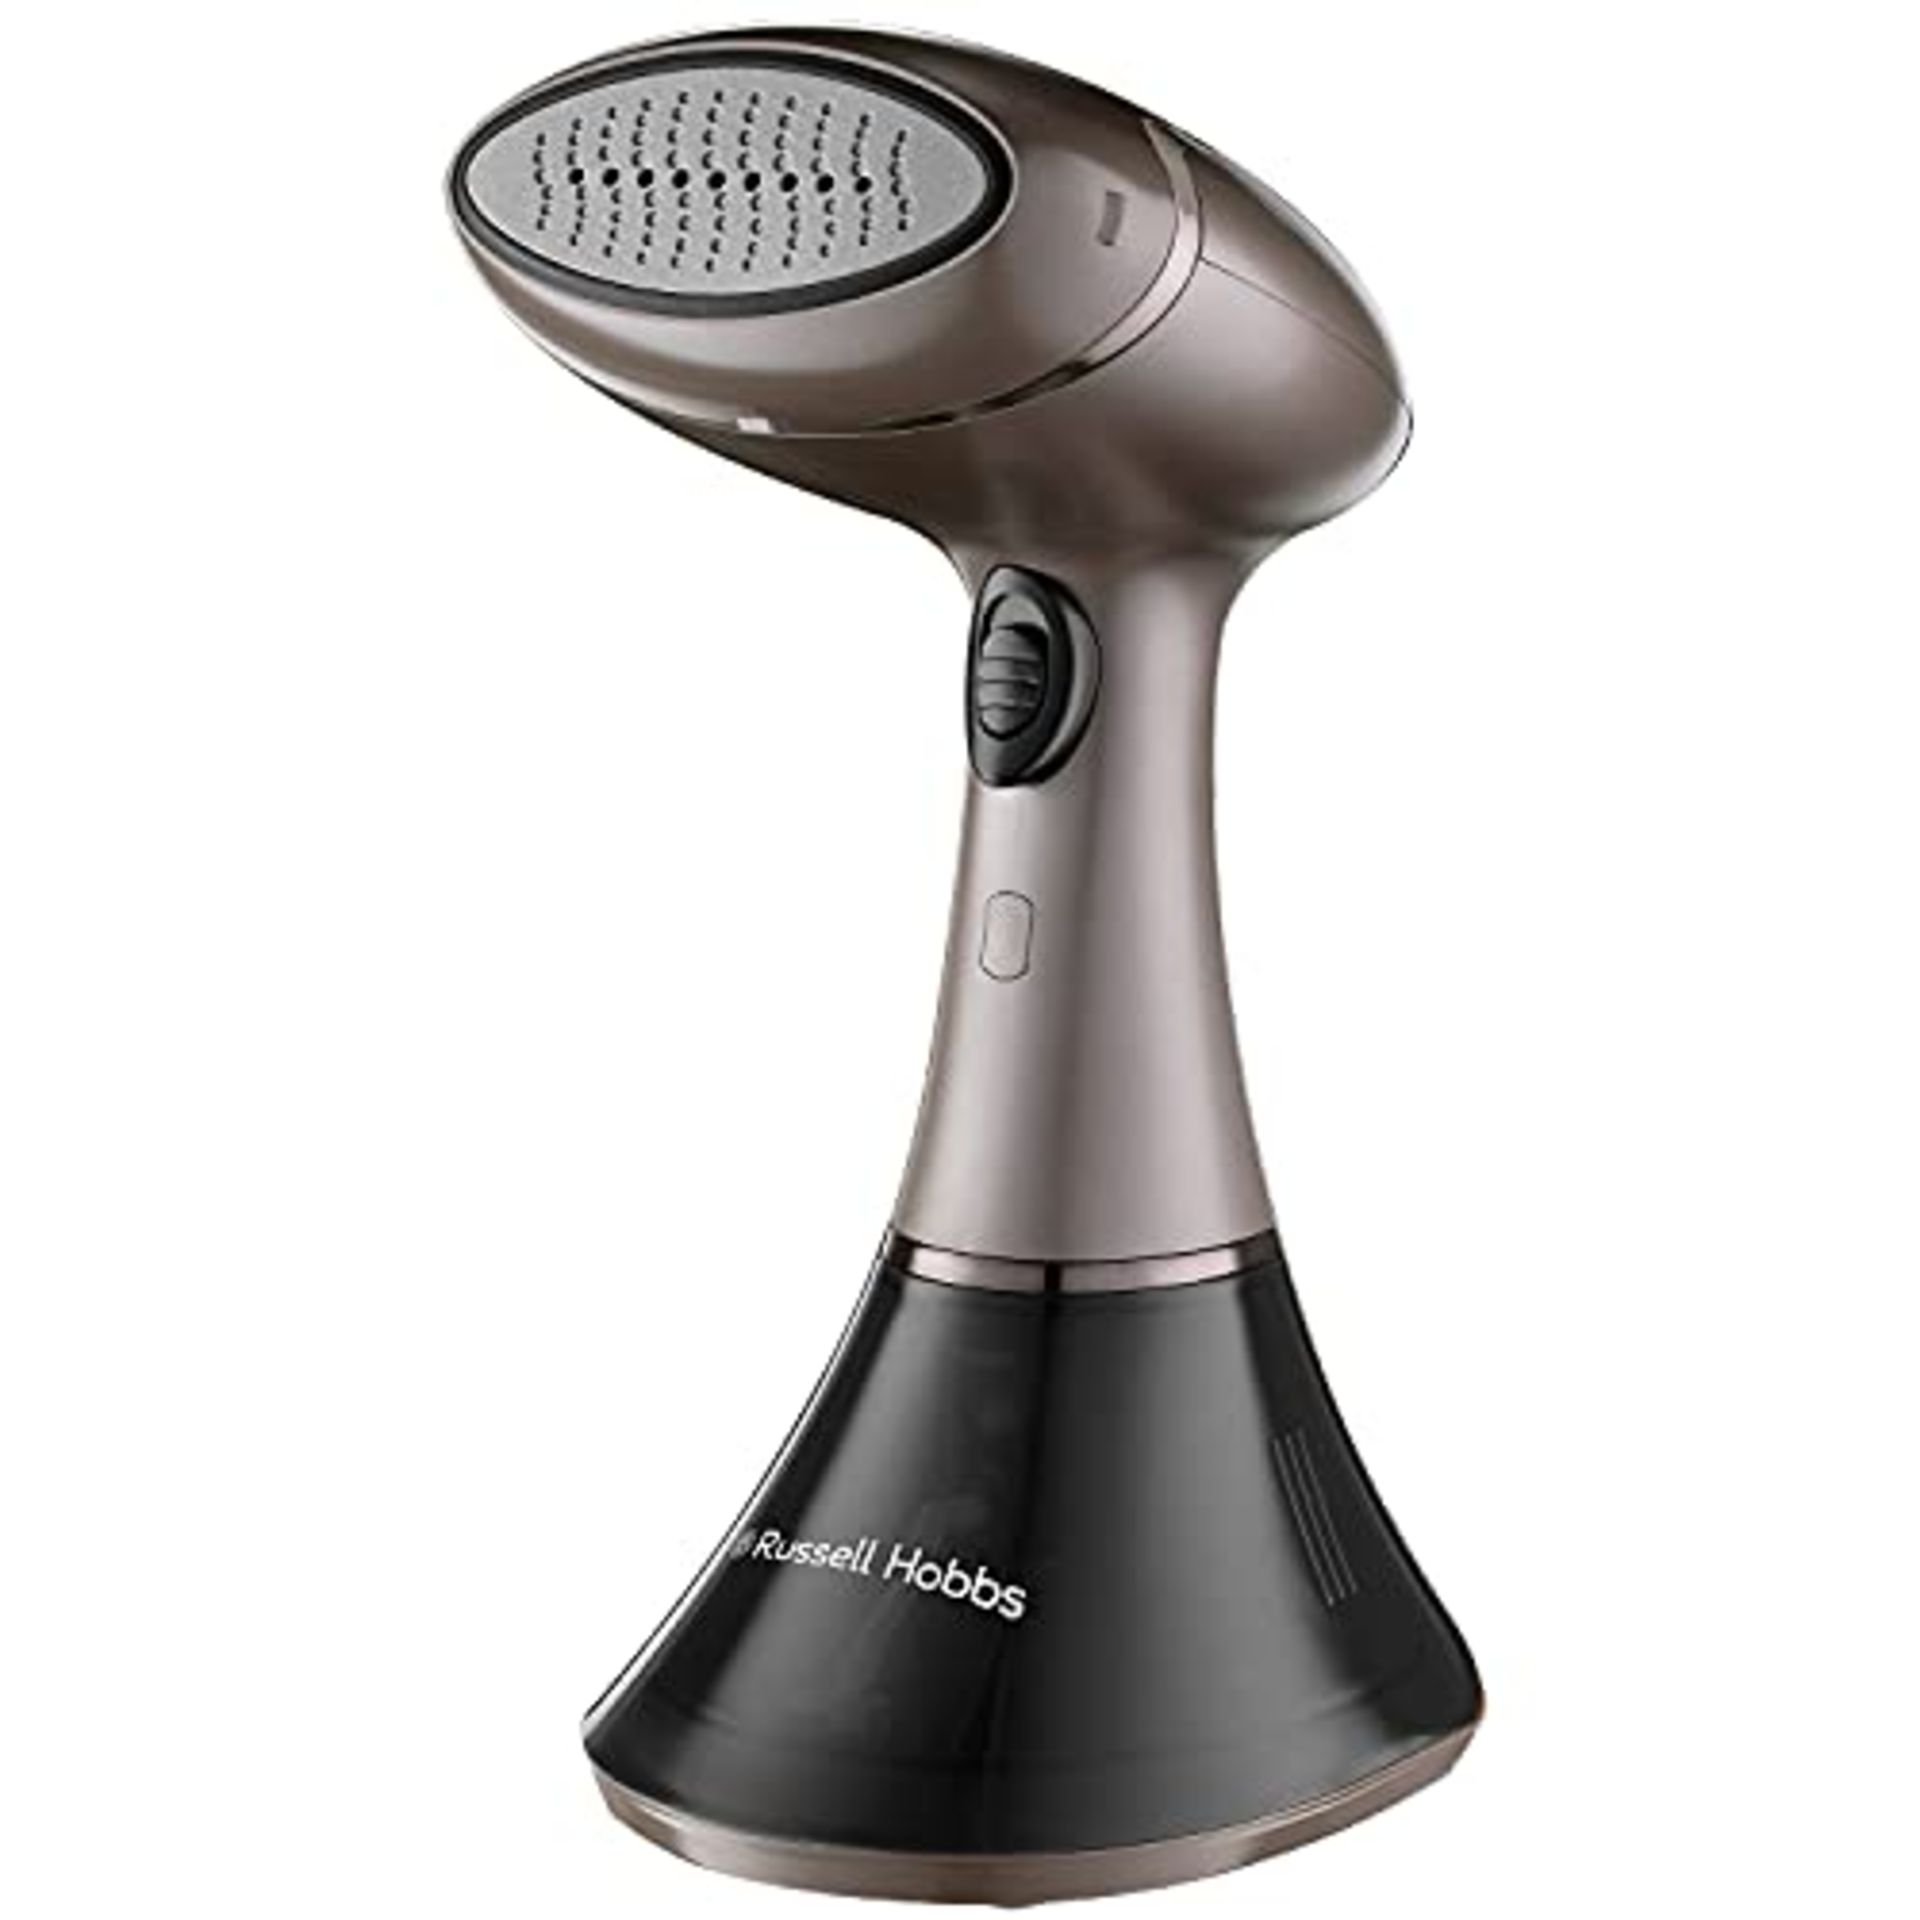 Russell Hobbs 28040 Steam Genie Aroma - Handheld Clothes Steamer for Garments, Curtains and Soft Fu